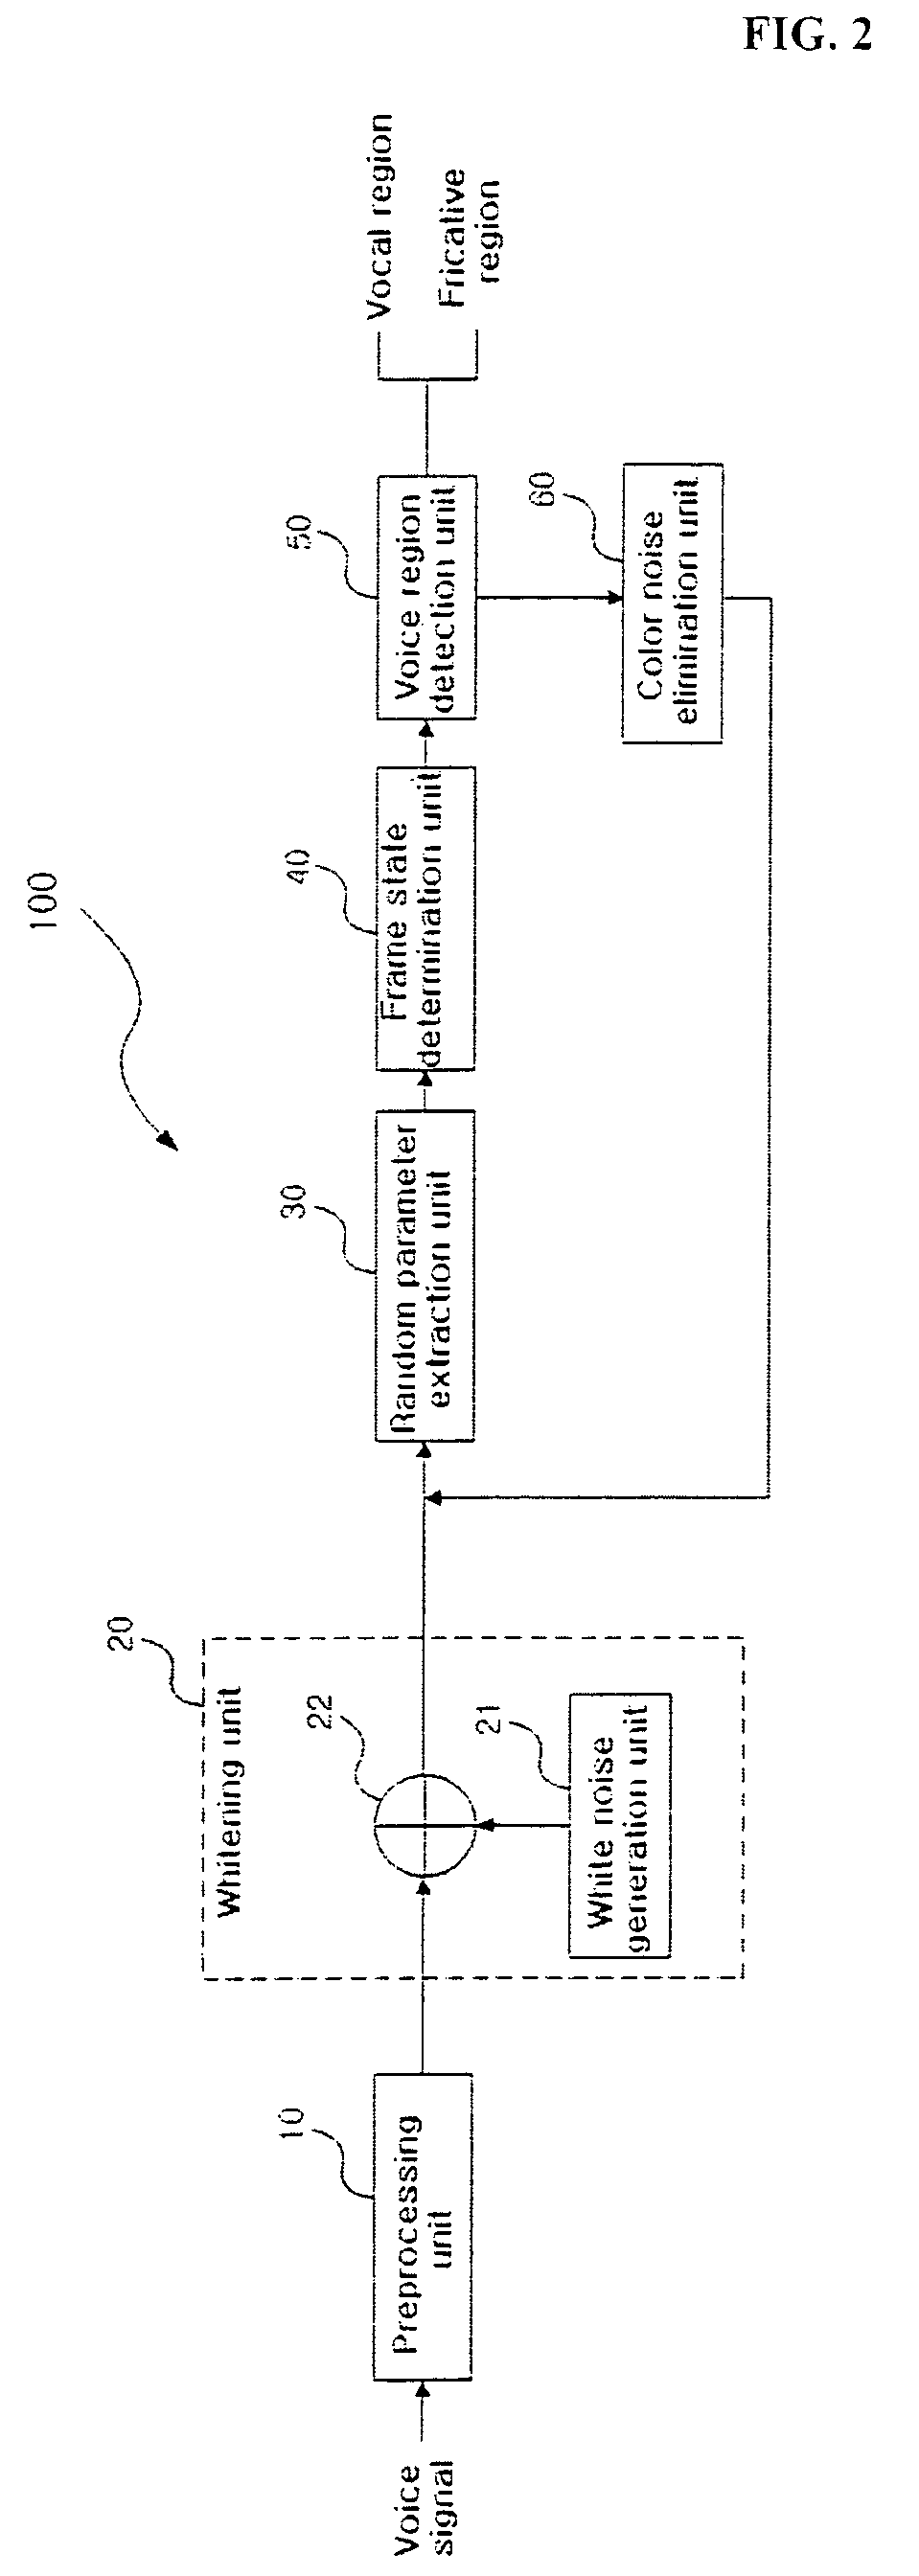 Voice region detection apparatus and method with color noise removal using run statistics